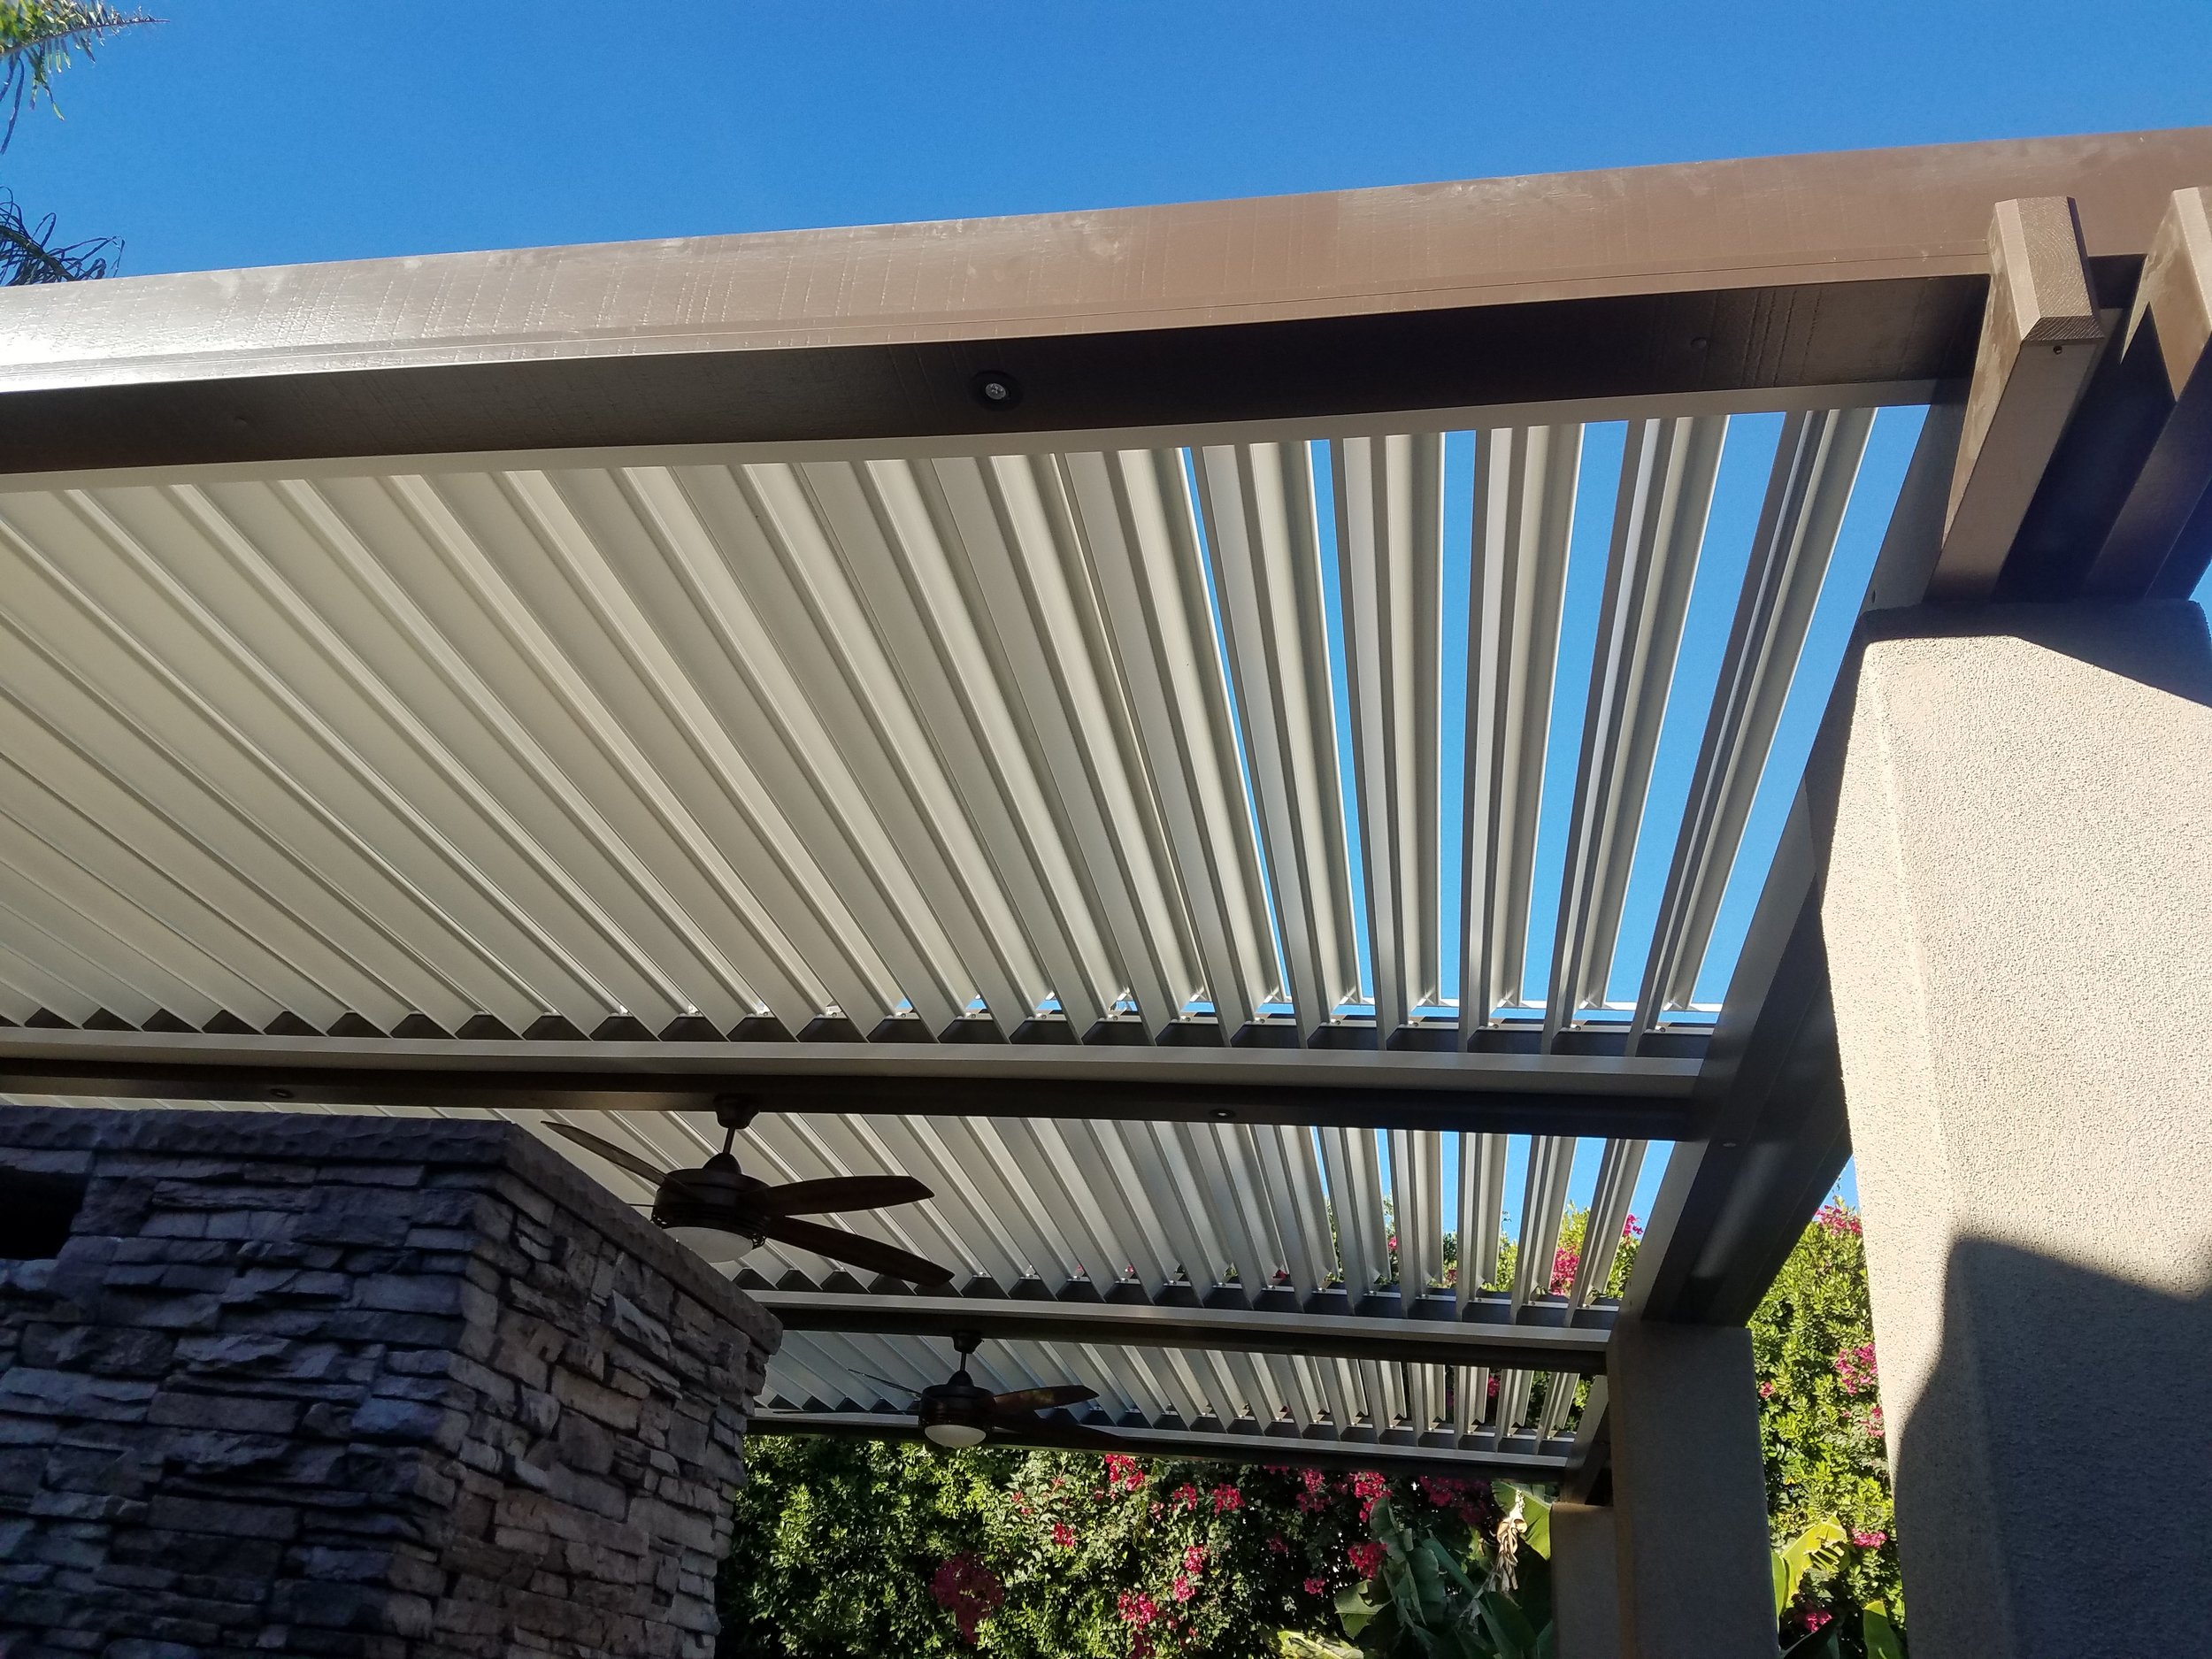 Jurupa Valley Apollo Louvered Roof System